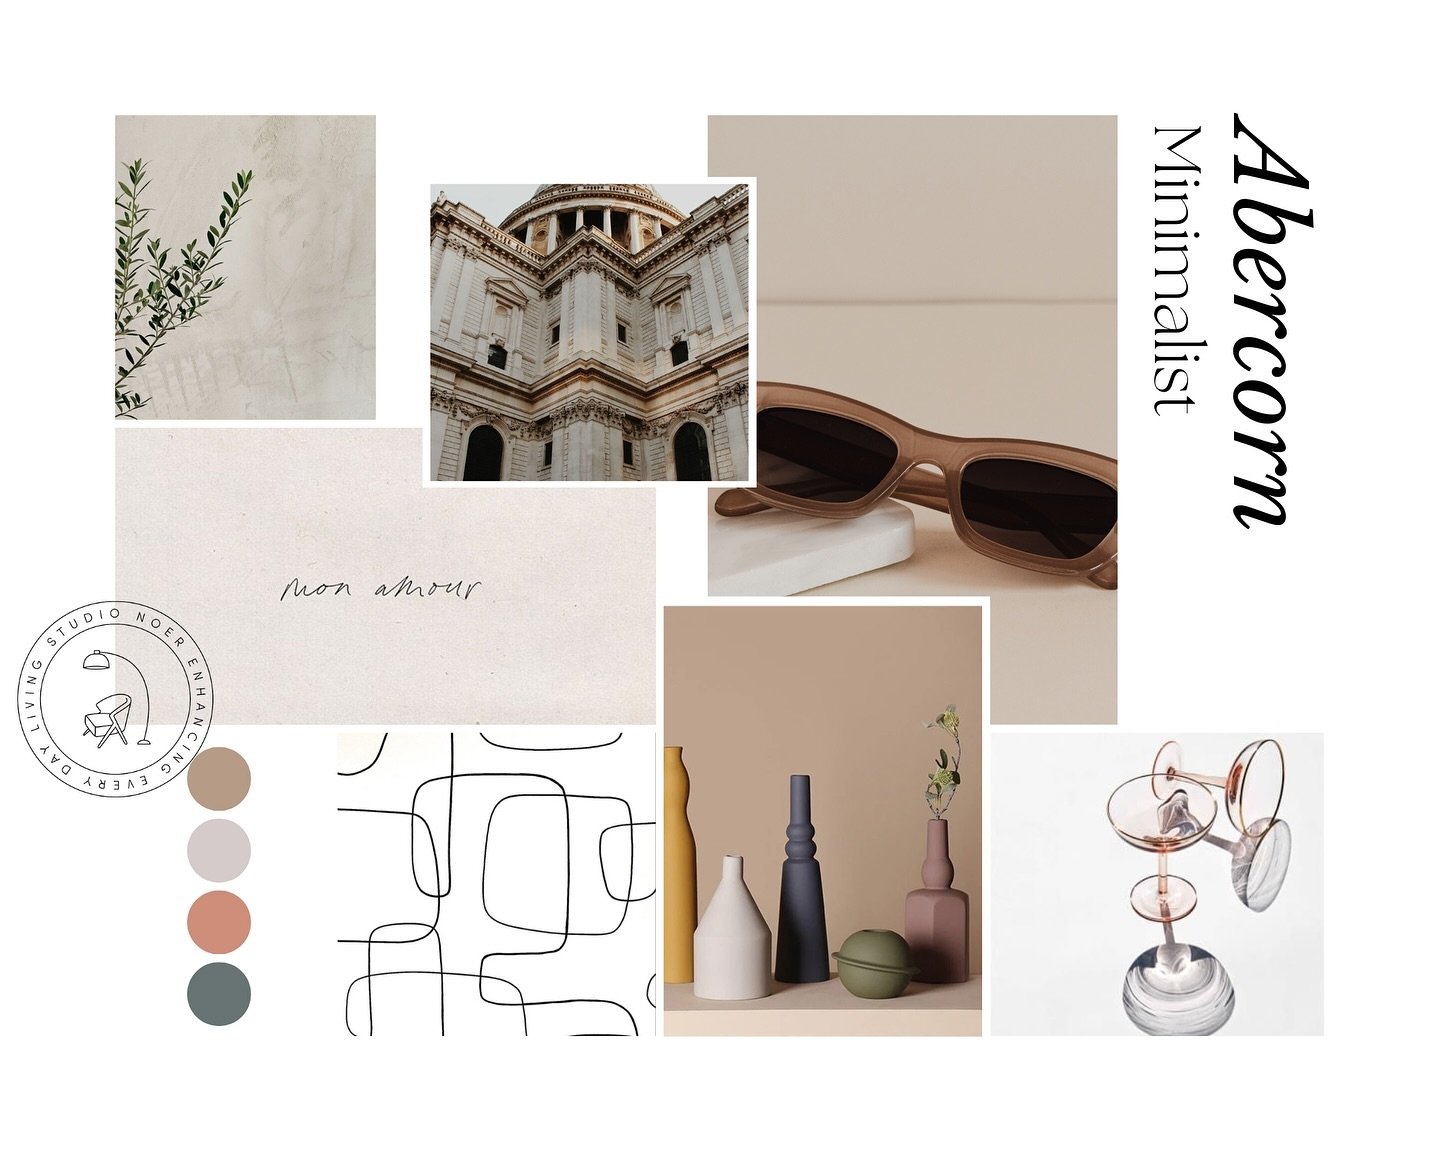 New moodboard for an upcoming project 🥳 Excited to get started on this soon. 
Let me know what you think x

#Renovation #ResidentialRenovation #LondonRenovation
#ContemporaryDesign #ModernHomes #MinimalistDesign
#LondonLifestyle #LondonLiving #Desig